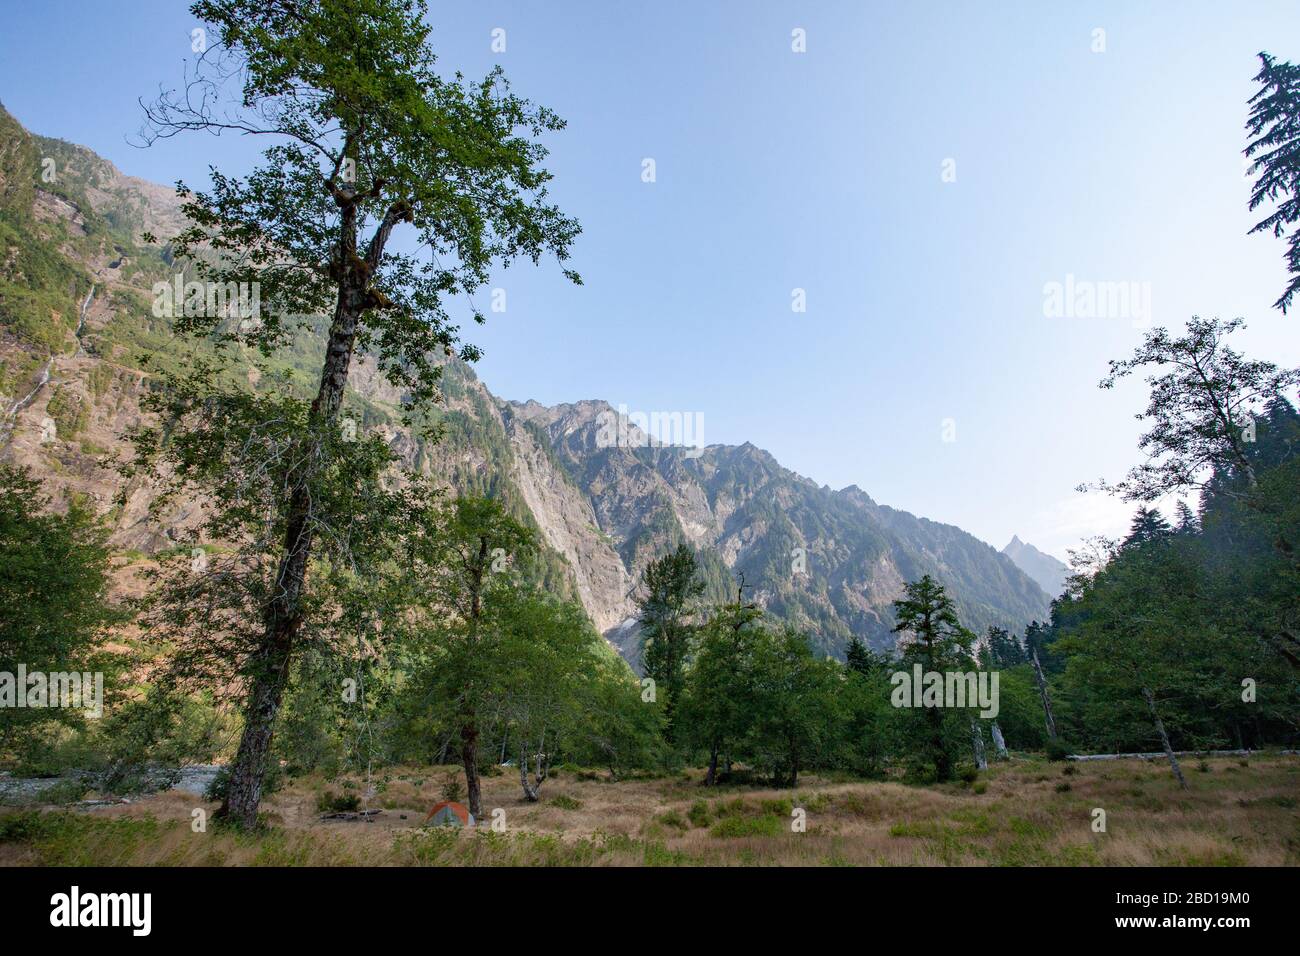 A small valley with sun-lit mountainsides and trees in the foreground Stock Photo